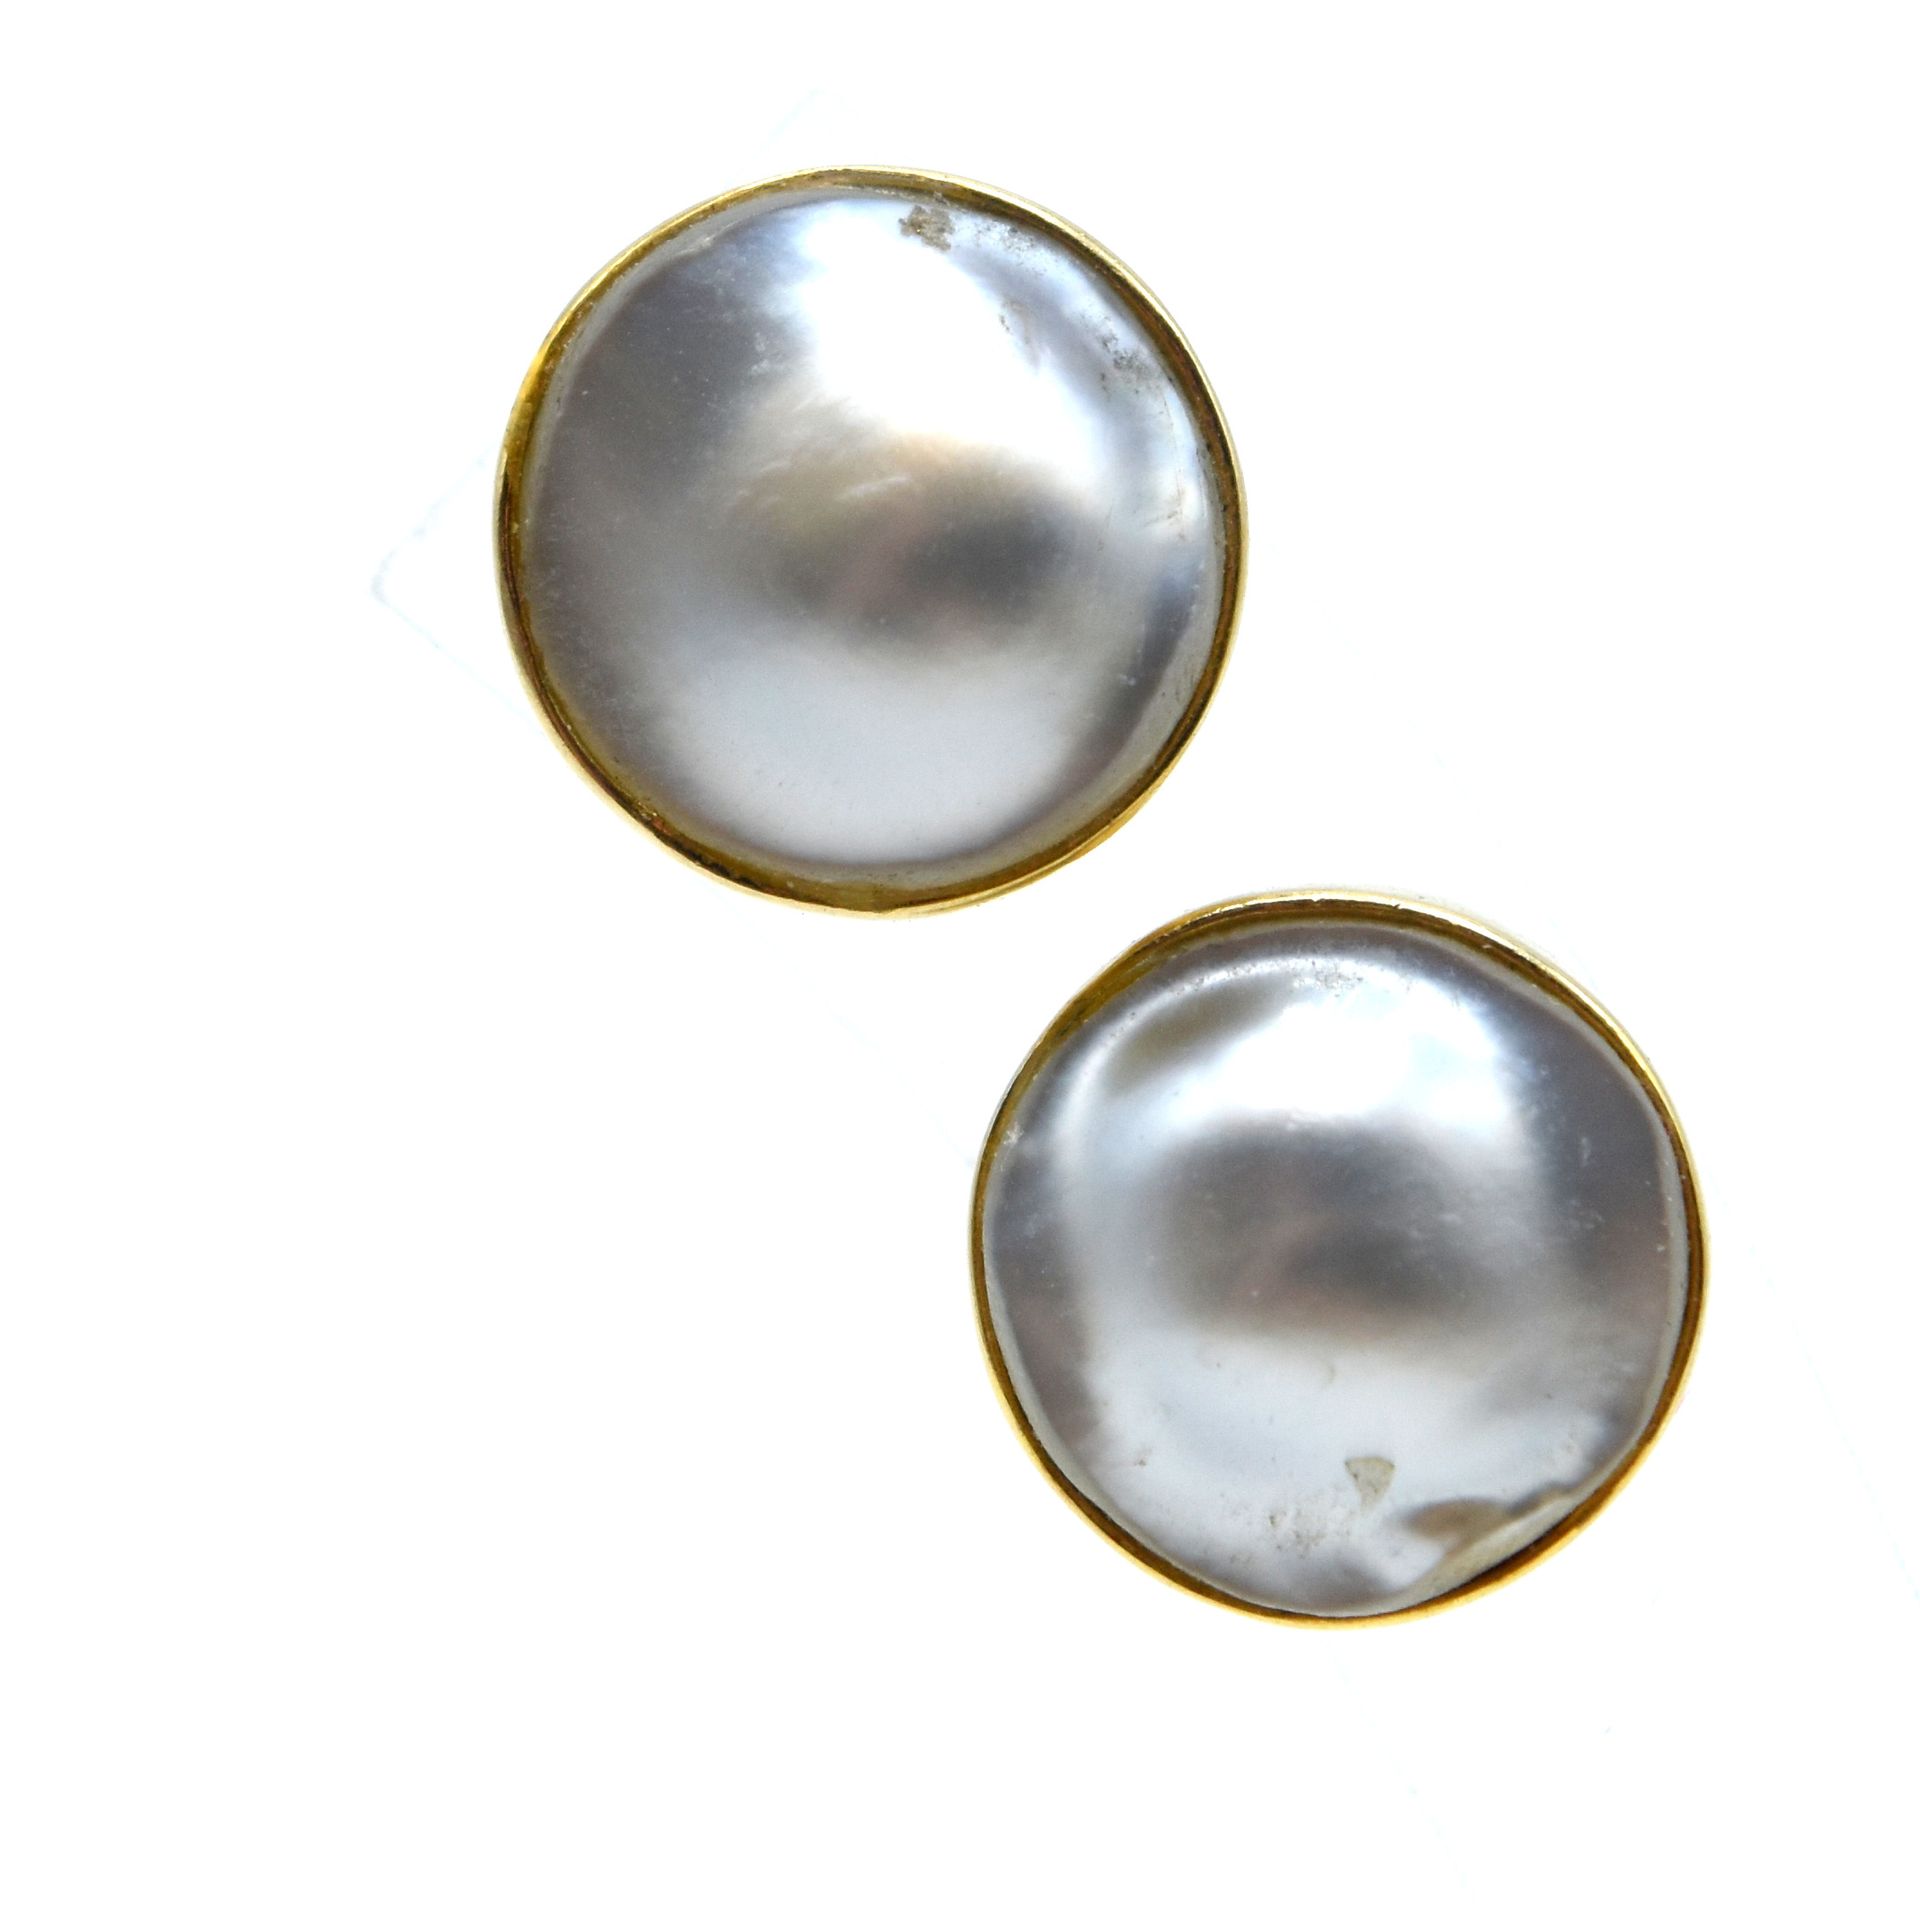 Null 2 earrings in 14 ct yellow gold set with 2 mabe pearls - 4 g gross 

NL :

&hellip;